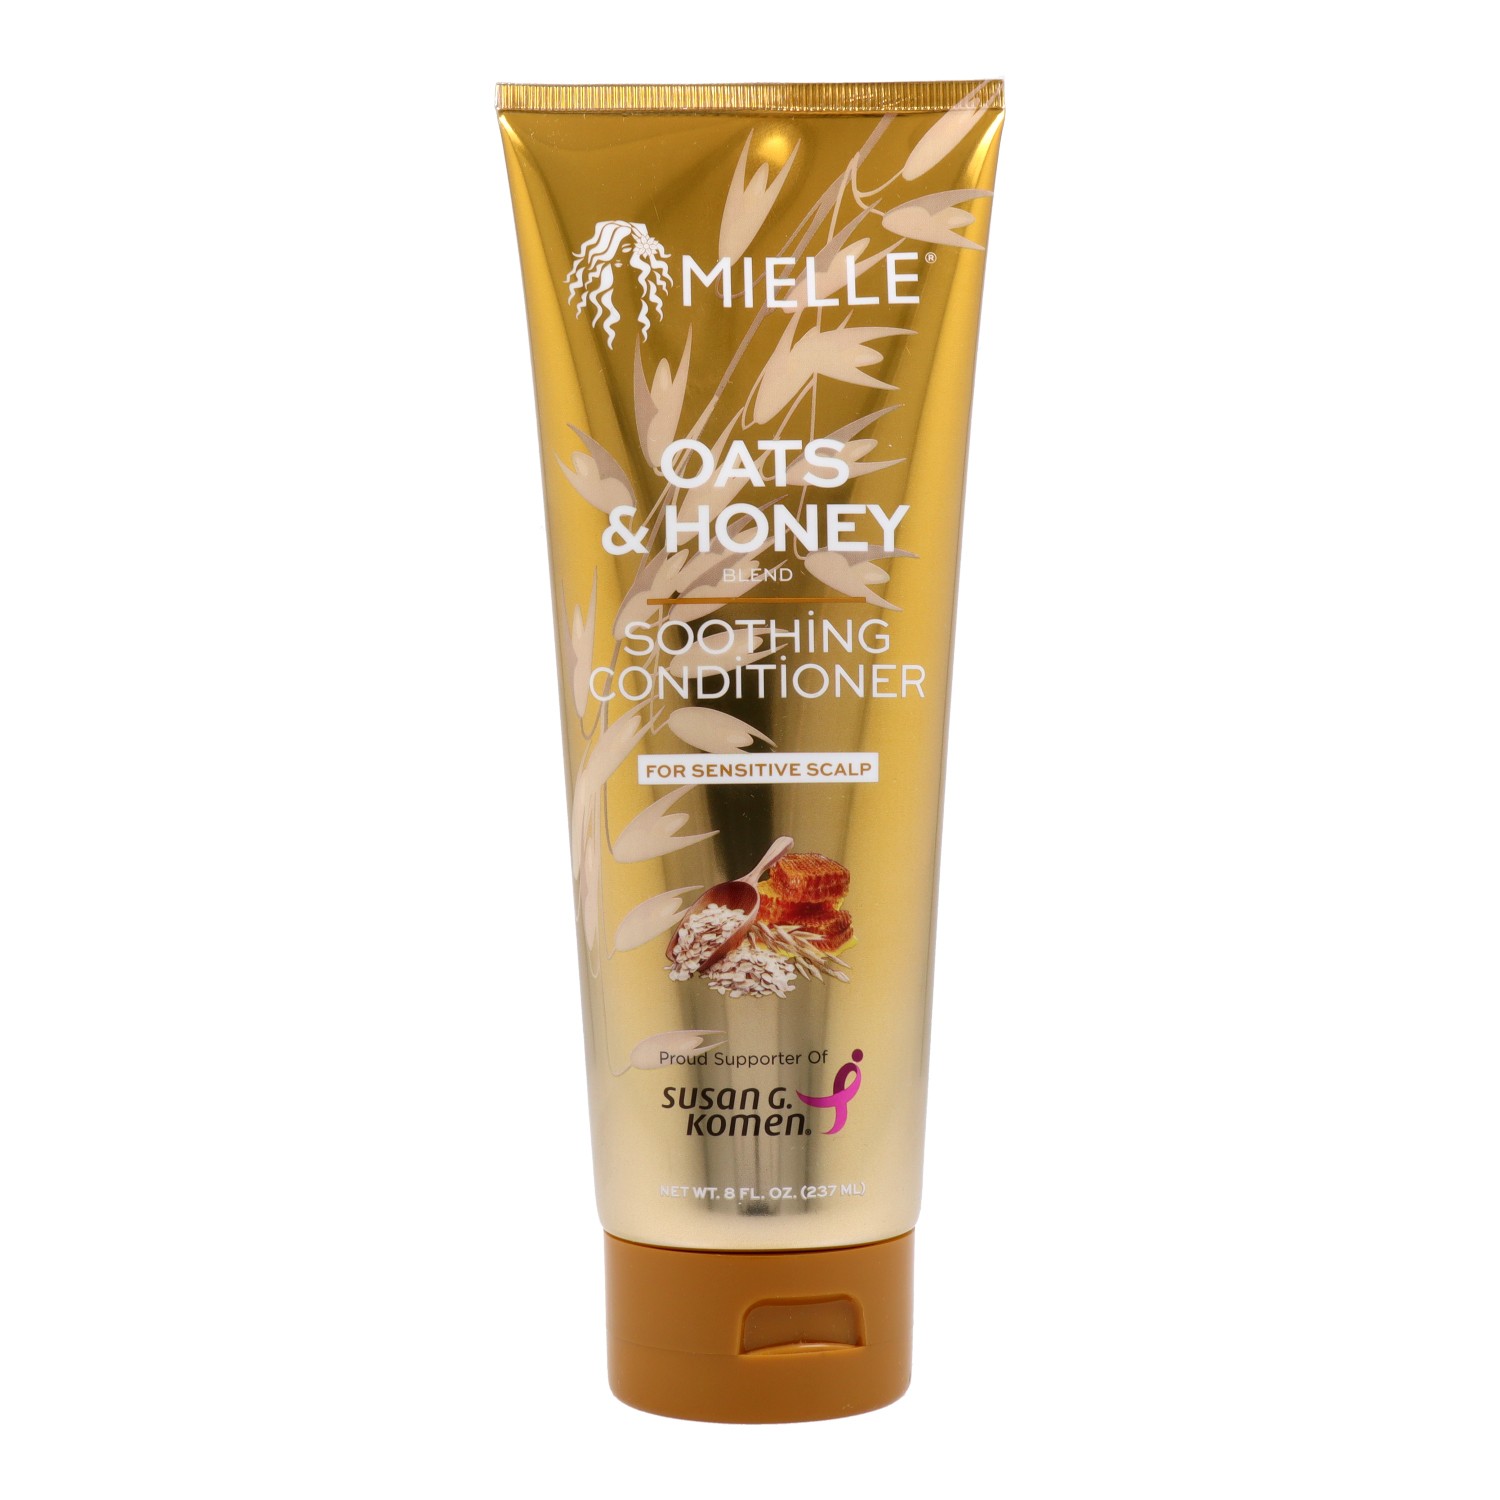 Mielle Oats Honey Soothing Conditioner 237ml